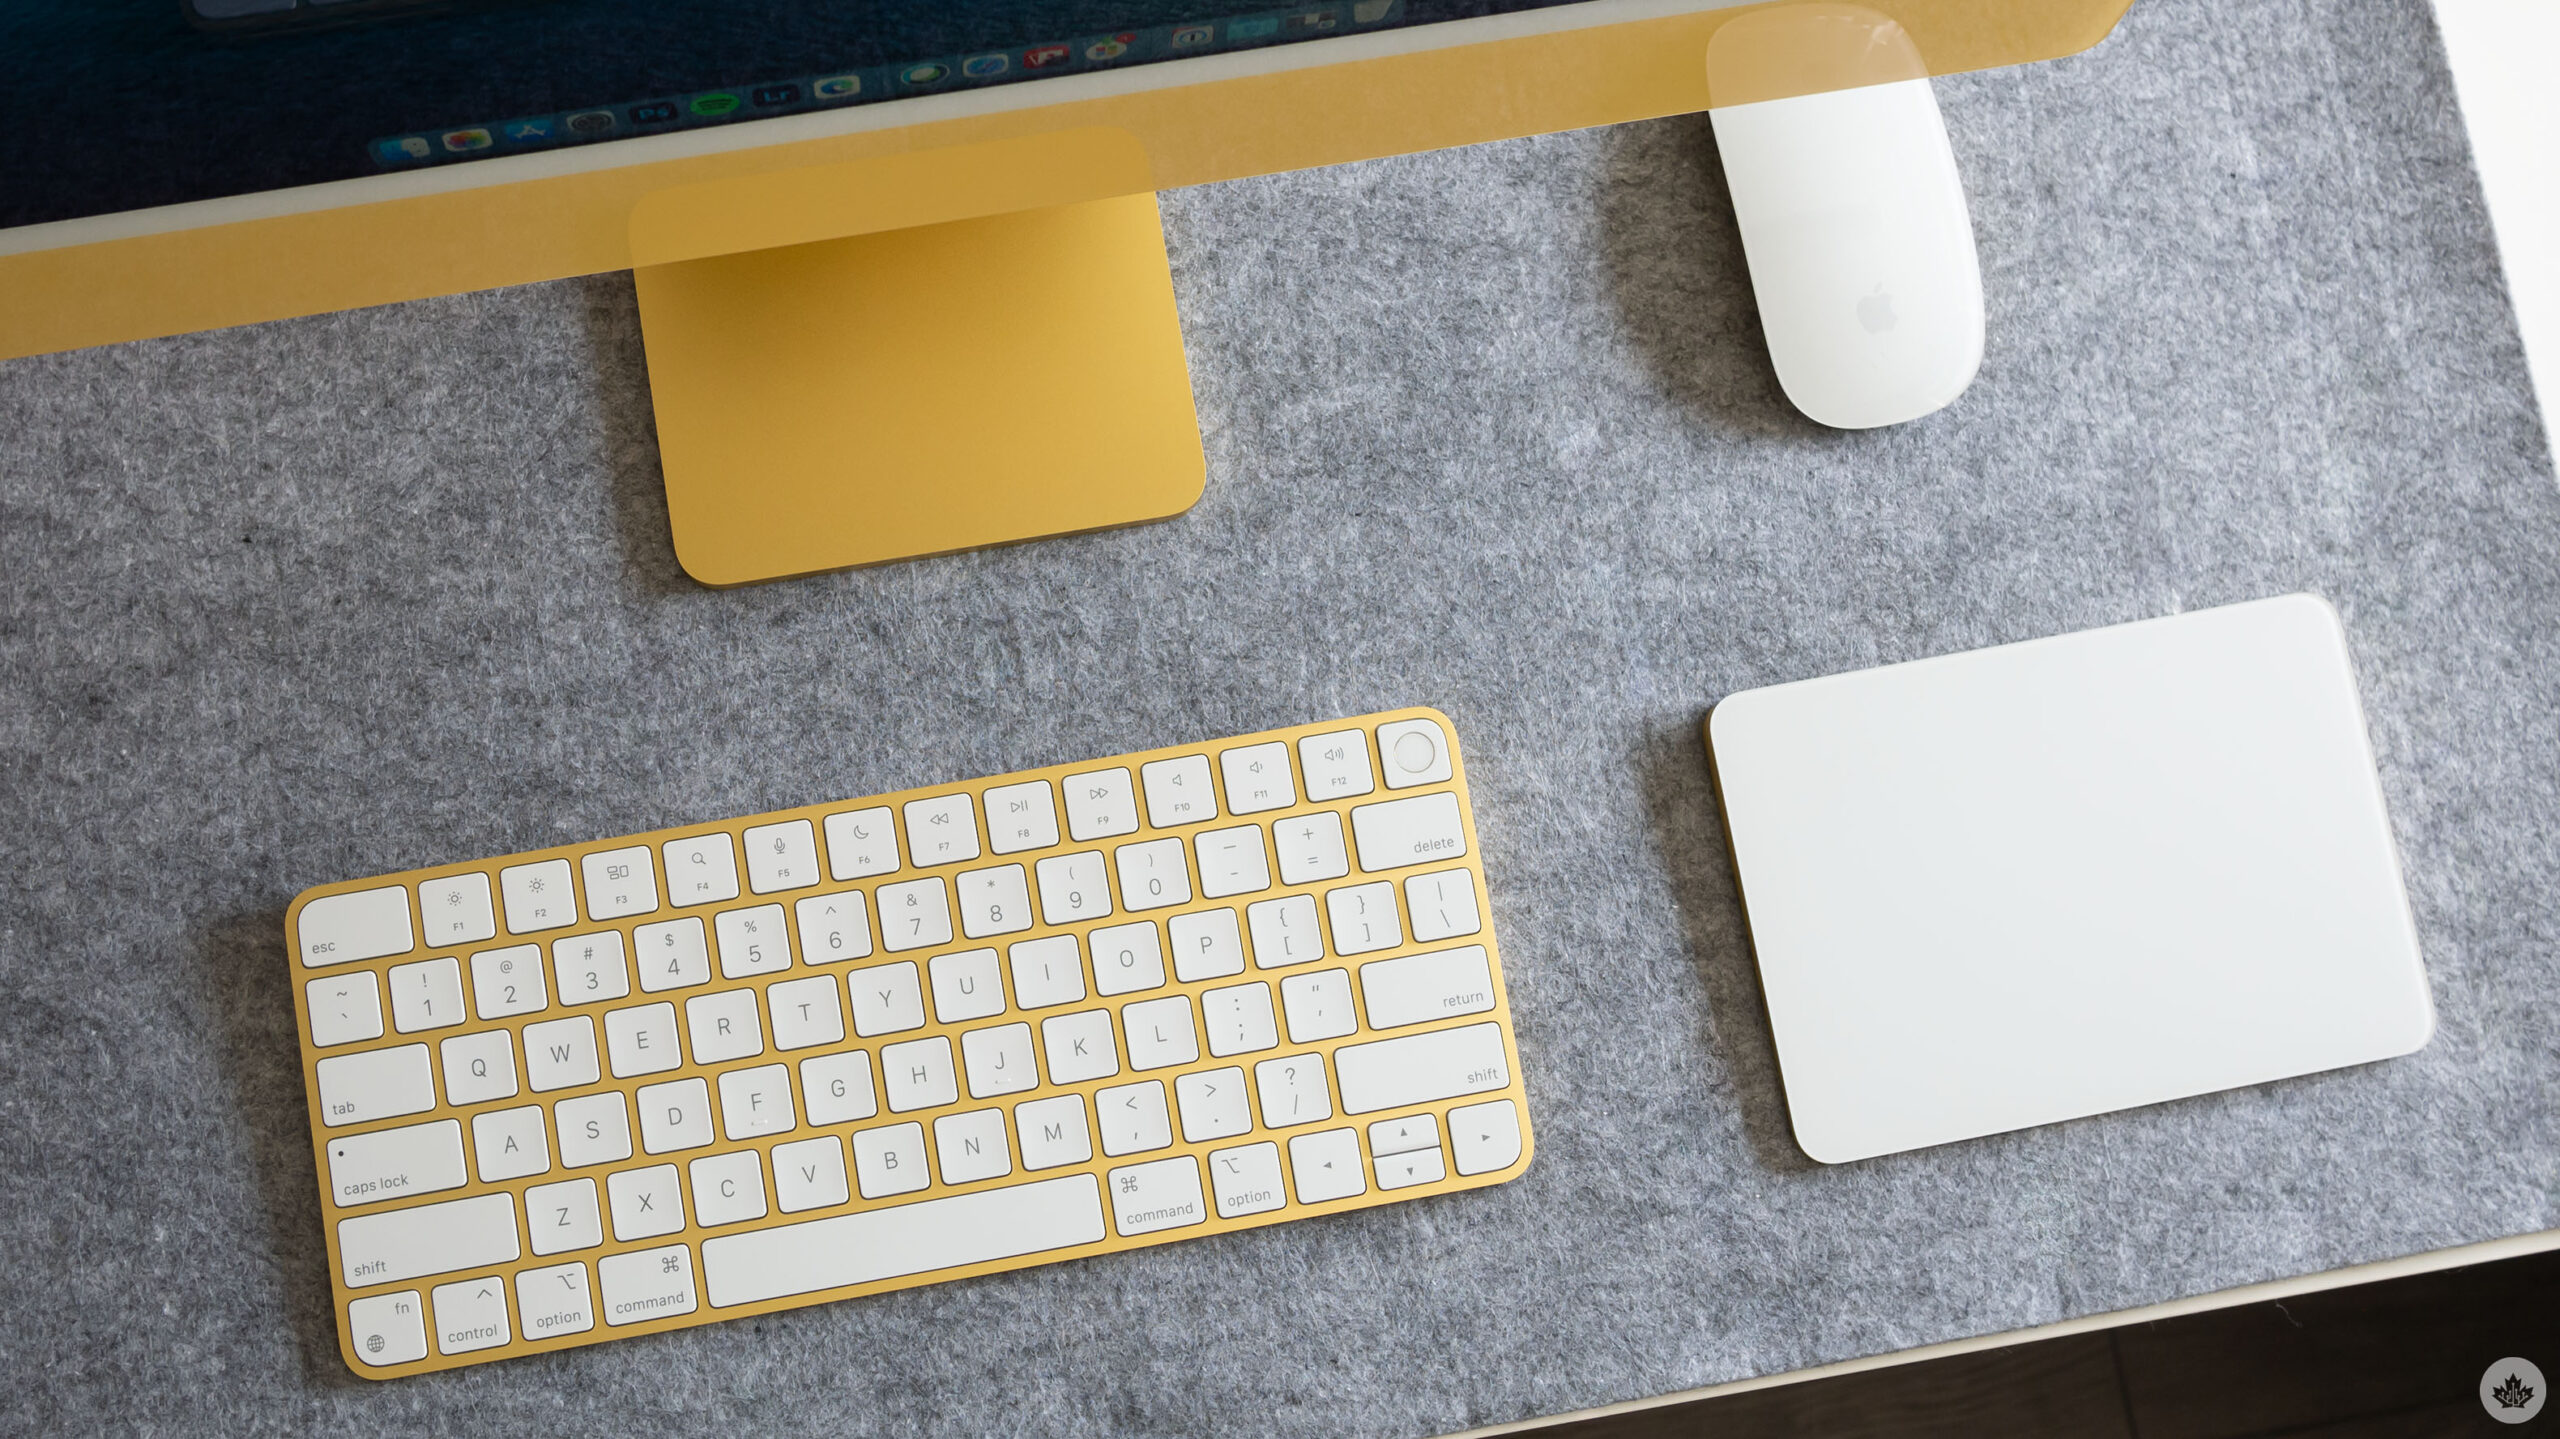 Apple's Magic Keyboard, Mouse and Trackpad still feature Lightning